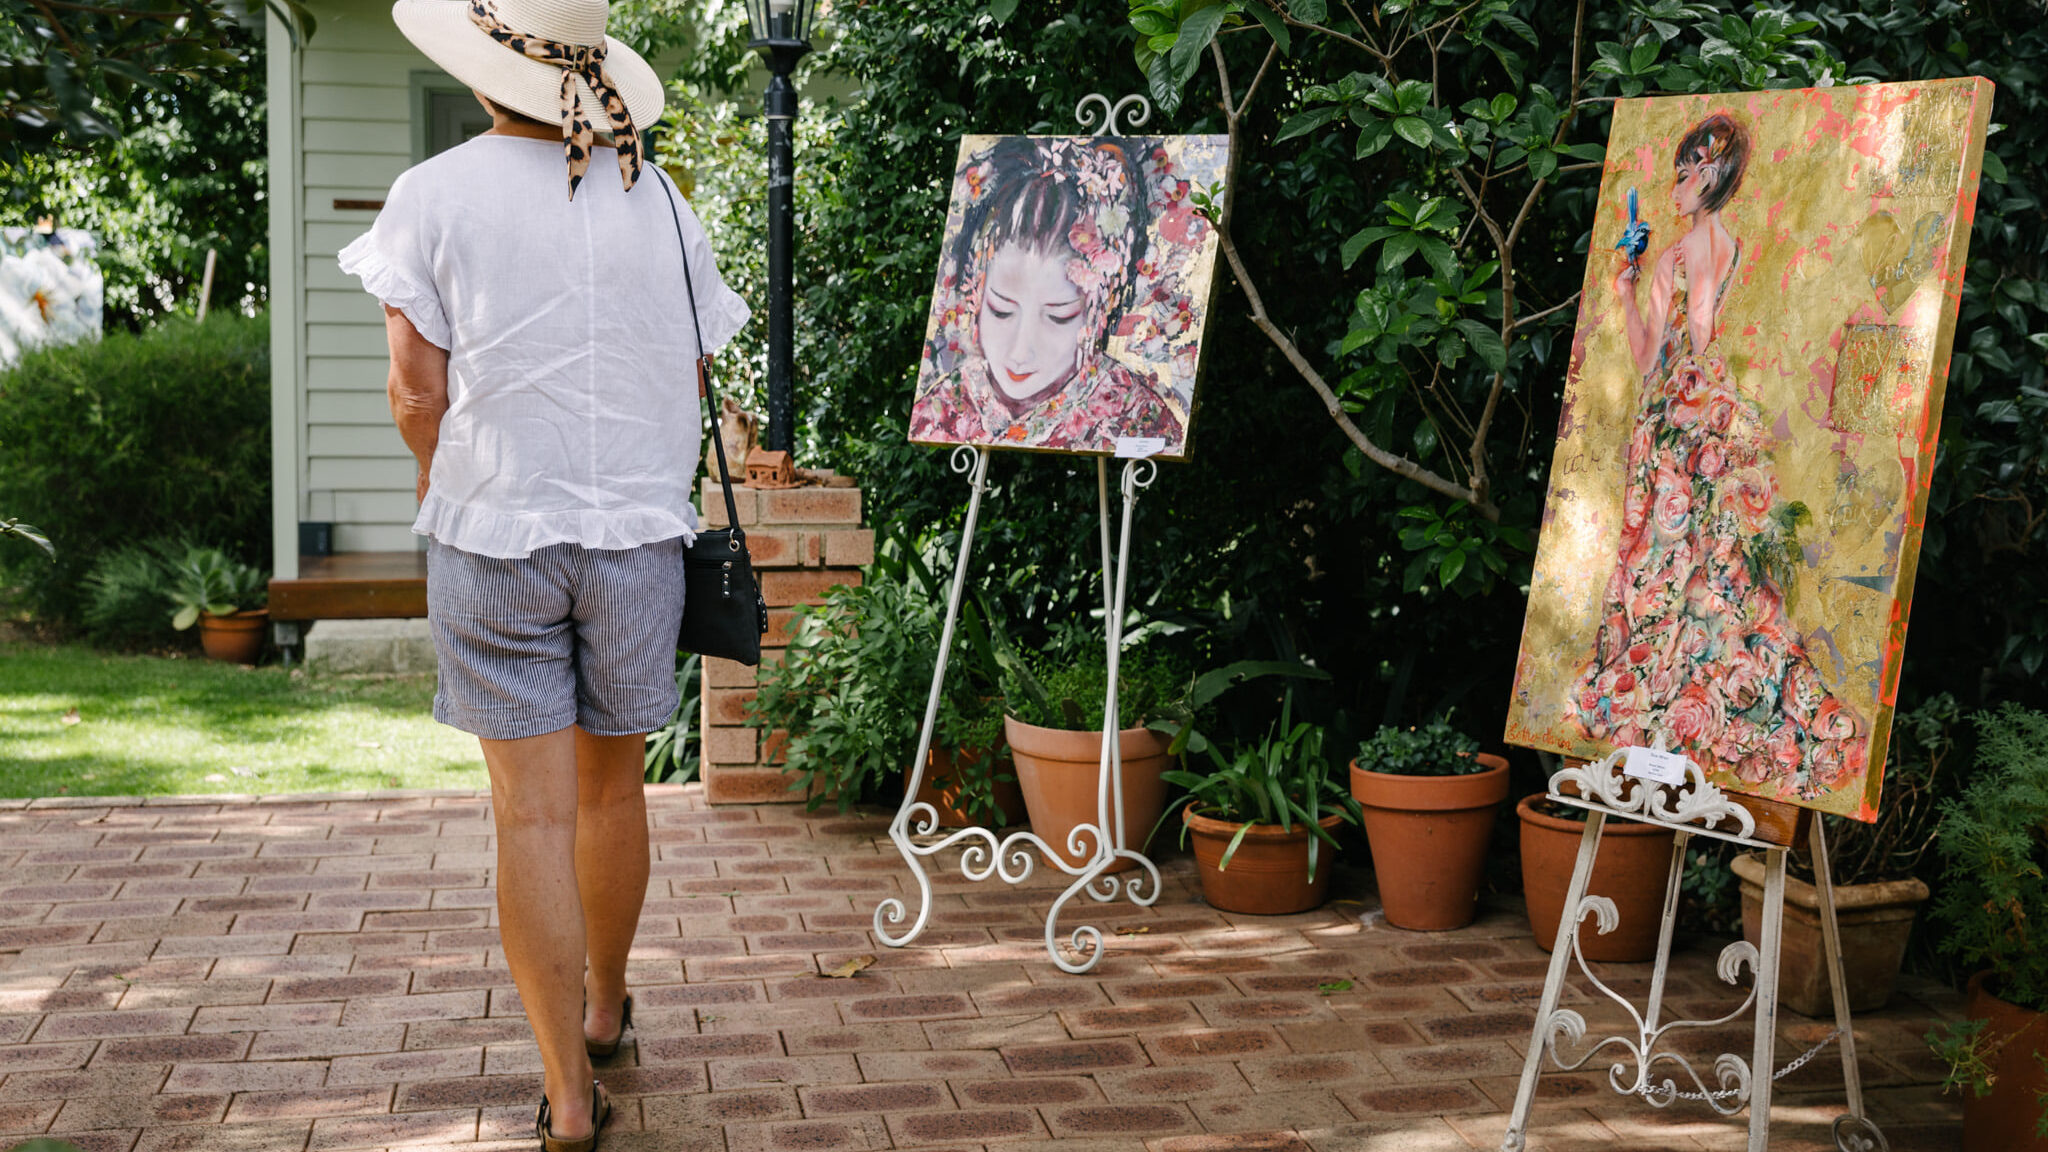 Visitor walking amongst paintings in a garden at the Tree Street Art Safari